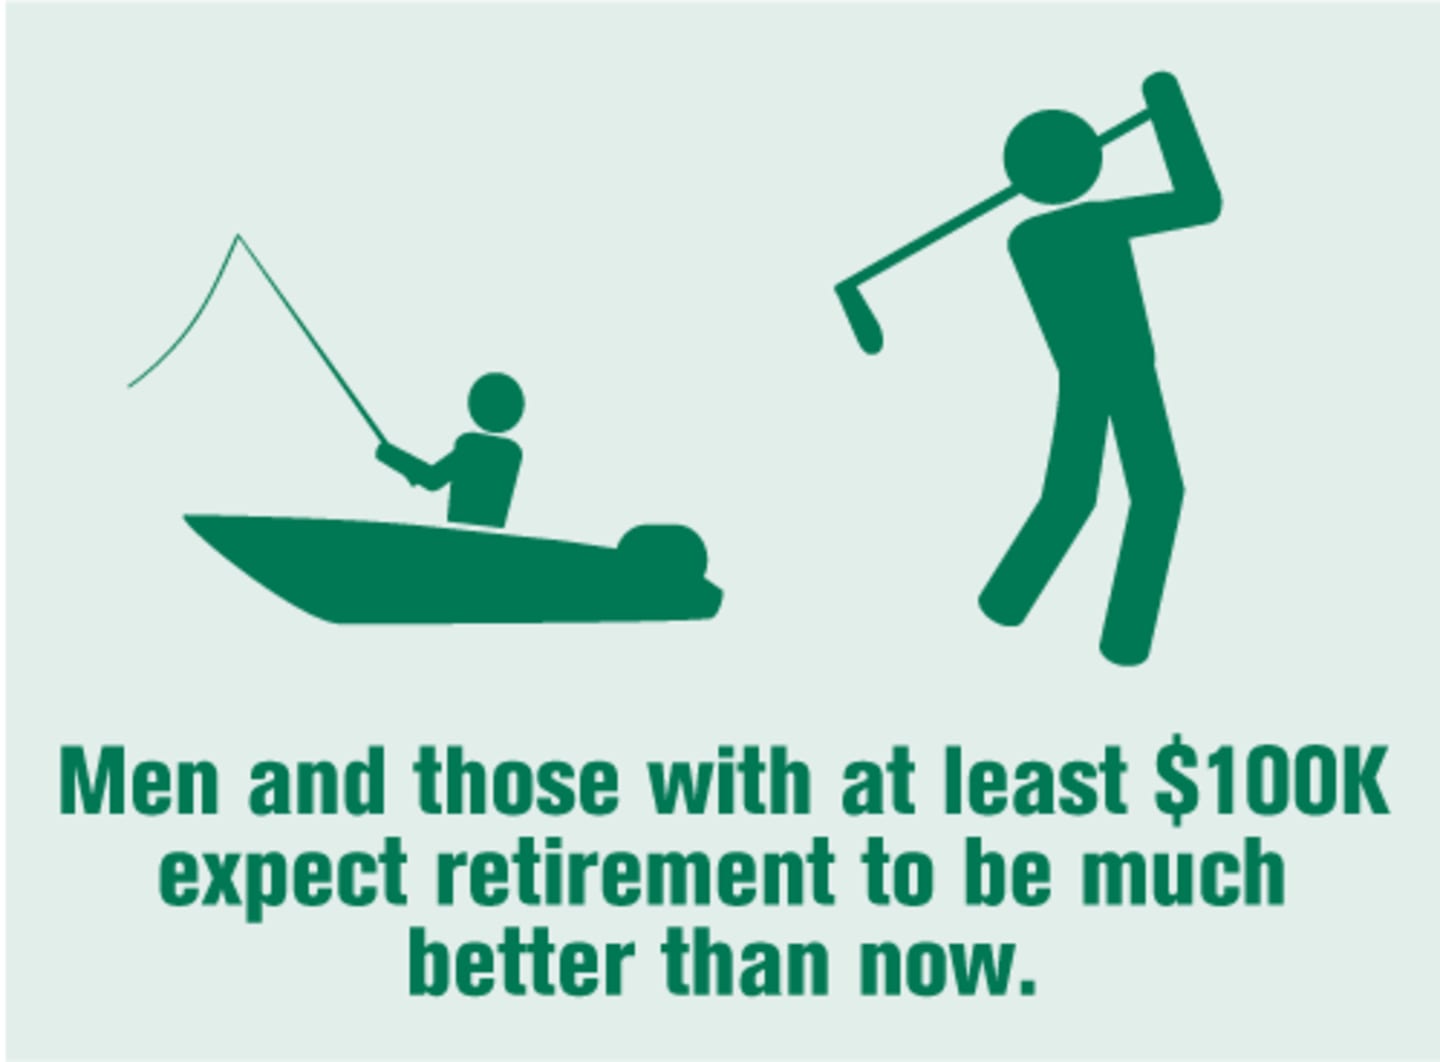 Men and those with at least $100k expect retirement to be much better than now.